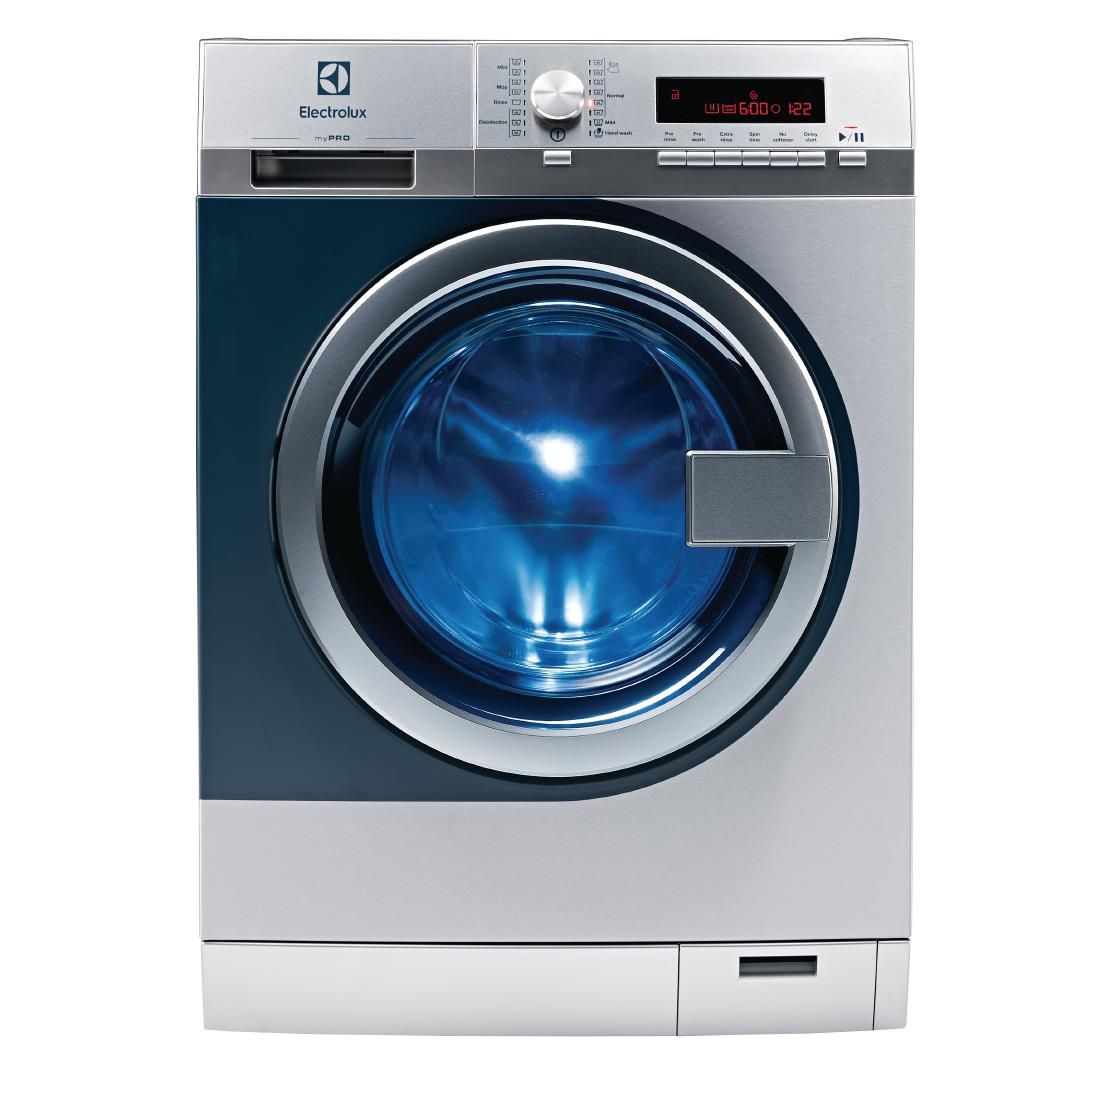 Electrolux myPRO Commercial Washing Machine WE170P With Pump CK375 JD Catering Equipment Solutions Ltd